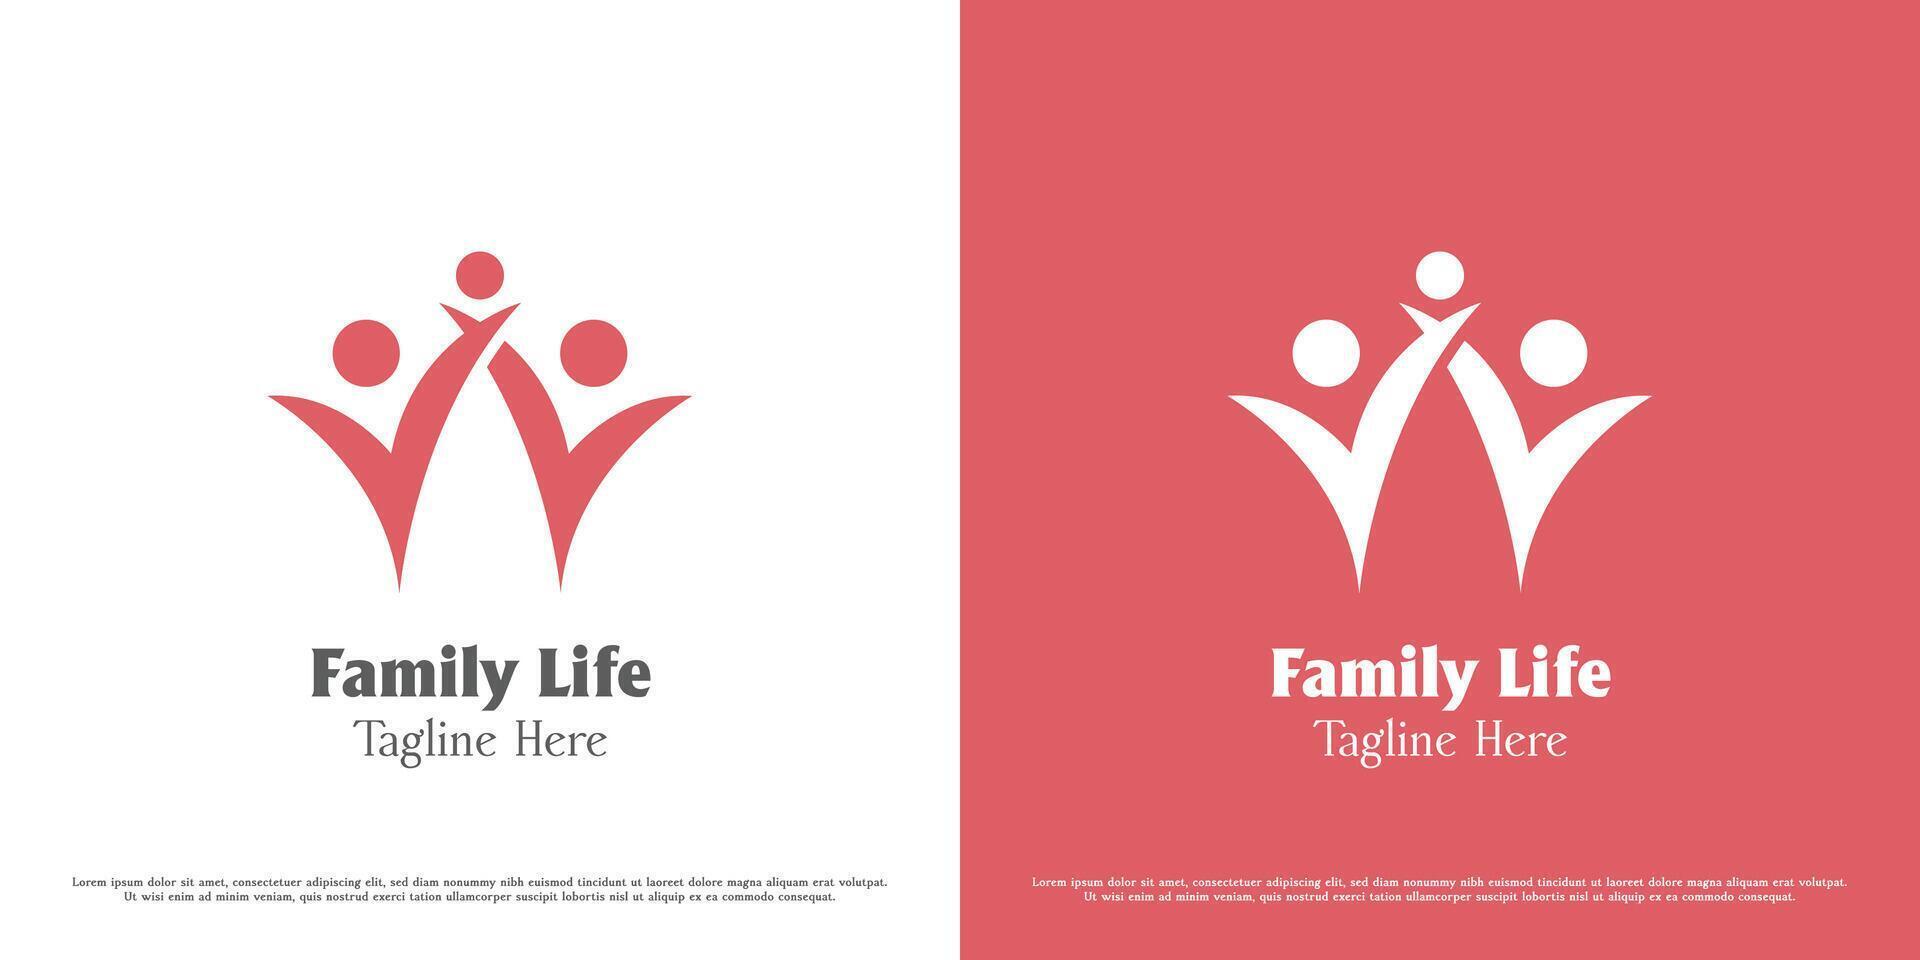 Happy family logo design illustration. Silhouettes of people family father mother child baby adult warm warm gentle care support help charity grateful emotion. Abstract minimal simple icon symbol. vector